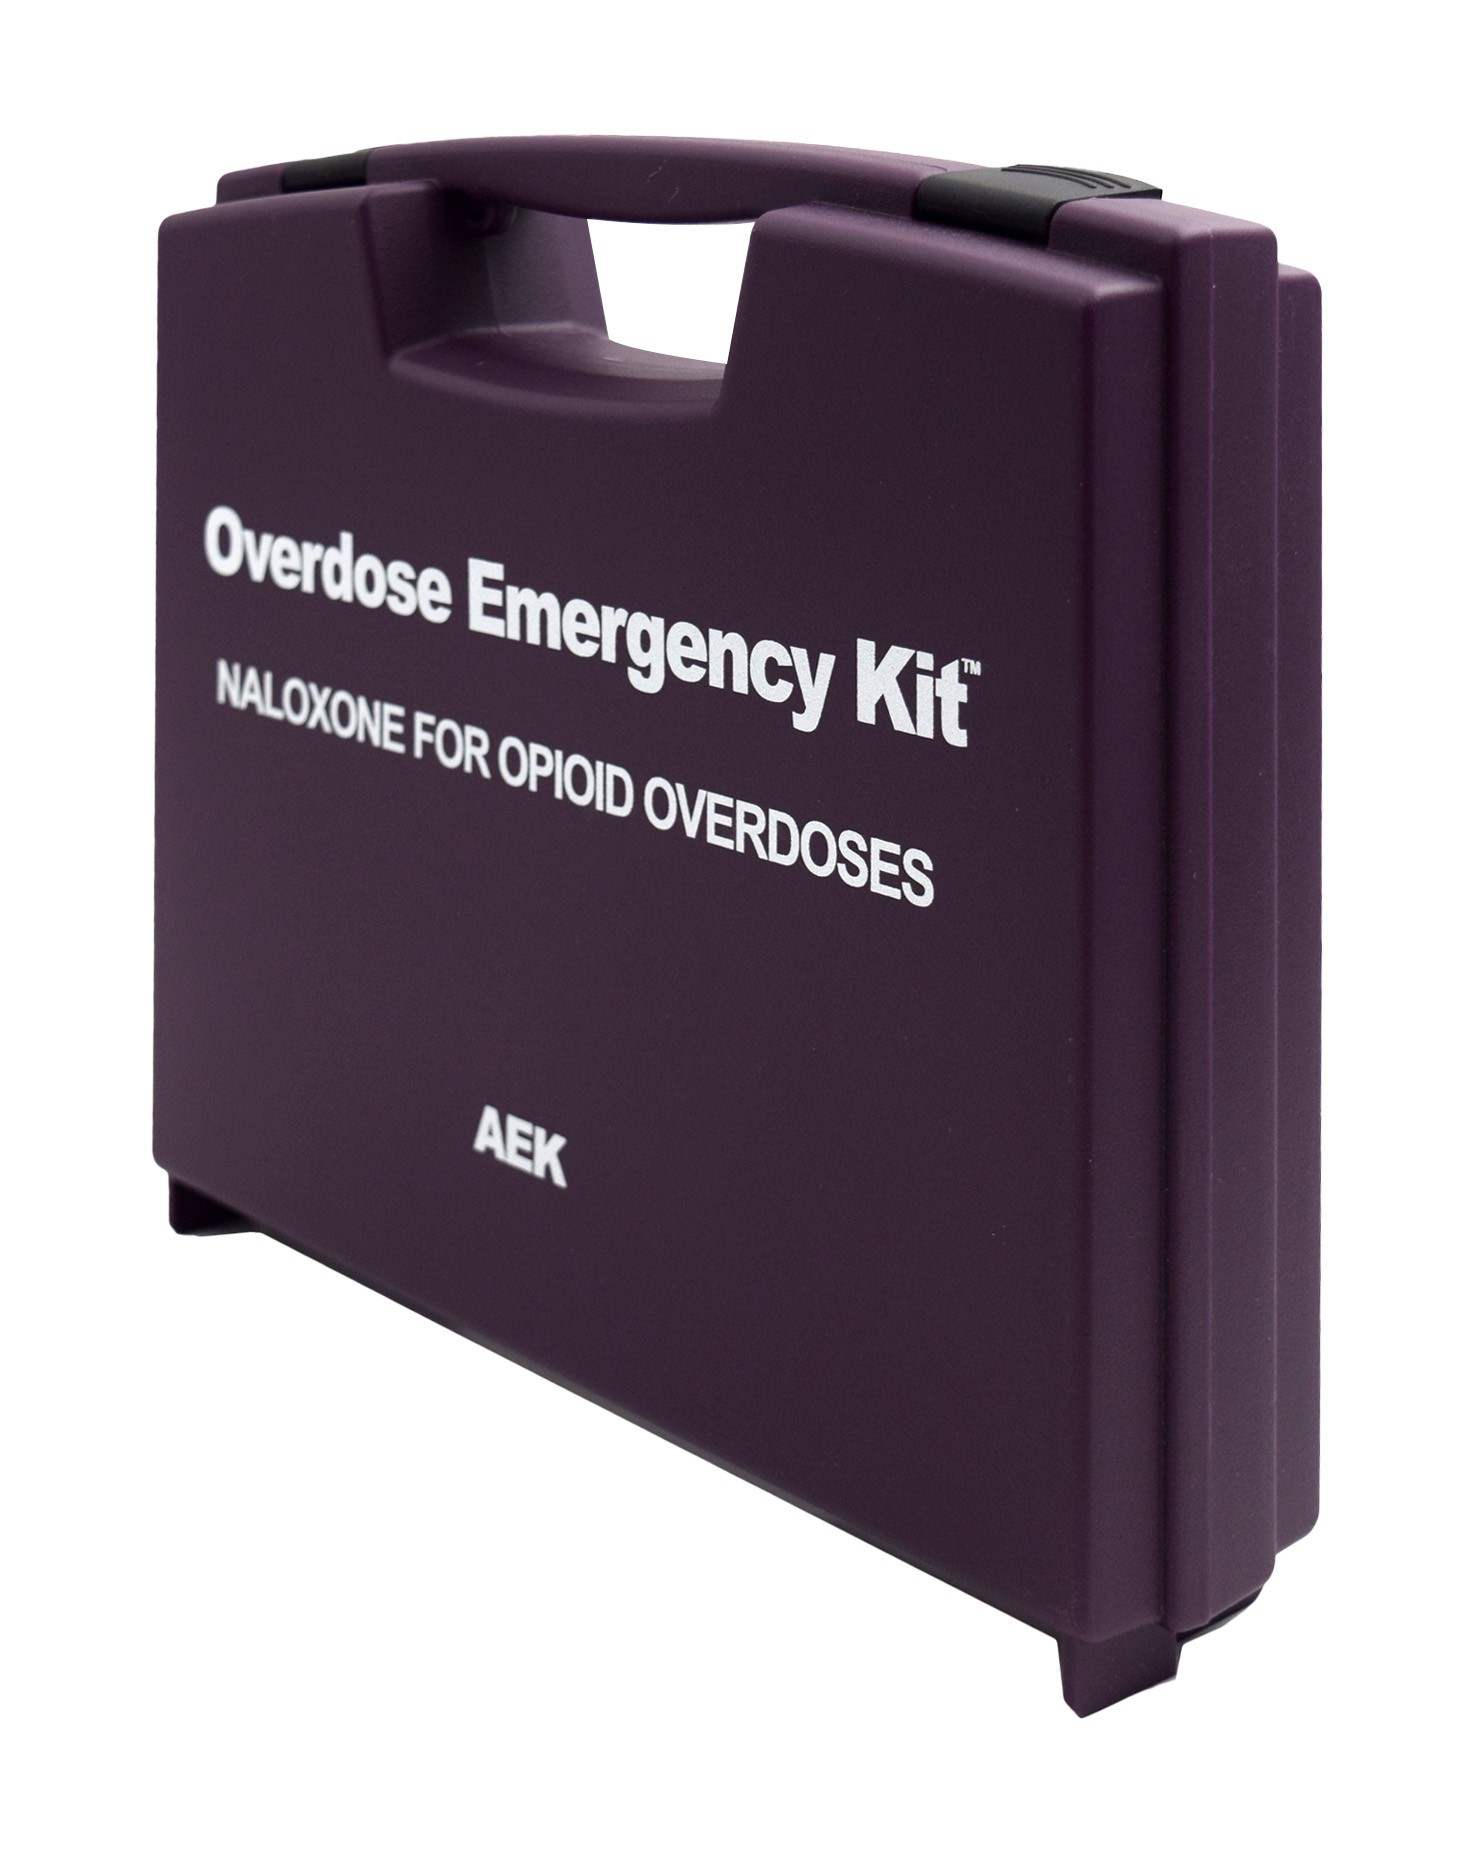 Opioid Overdose Emergency Carry Case/Cabinet